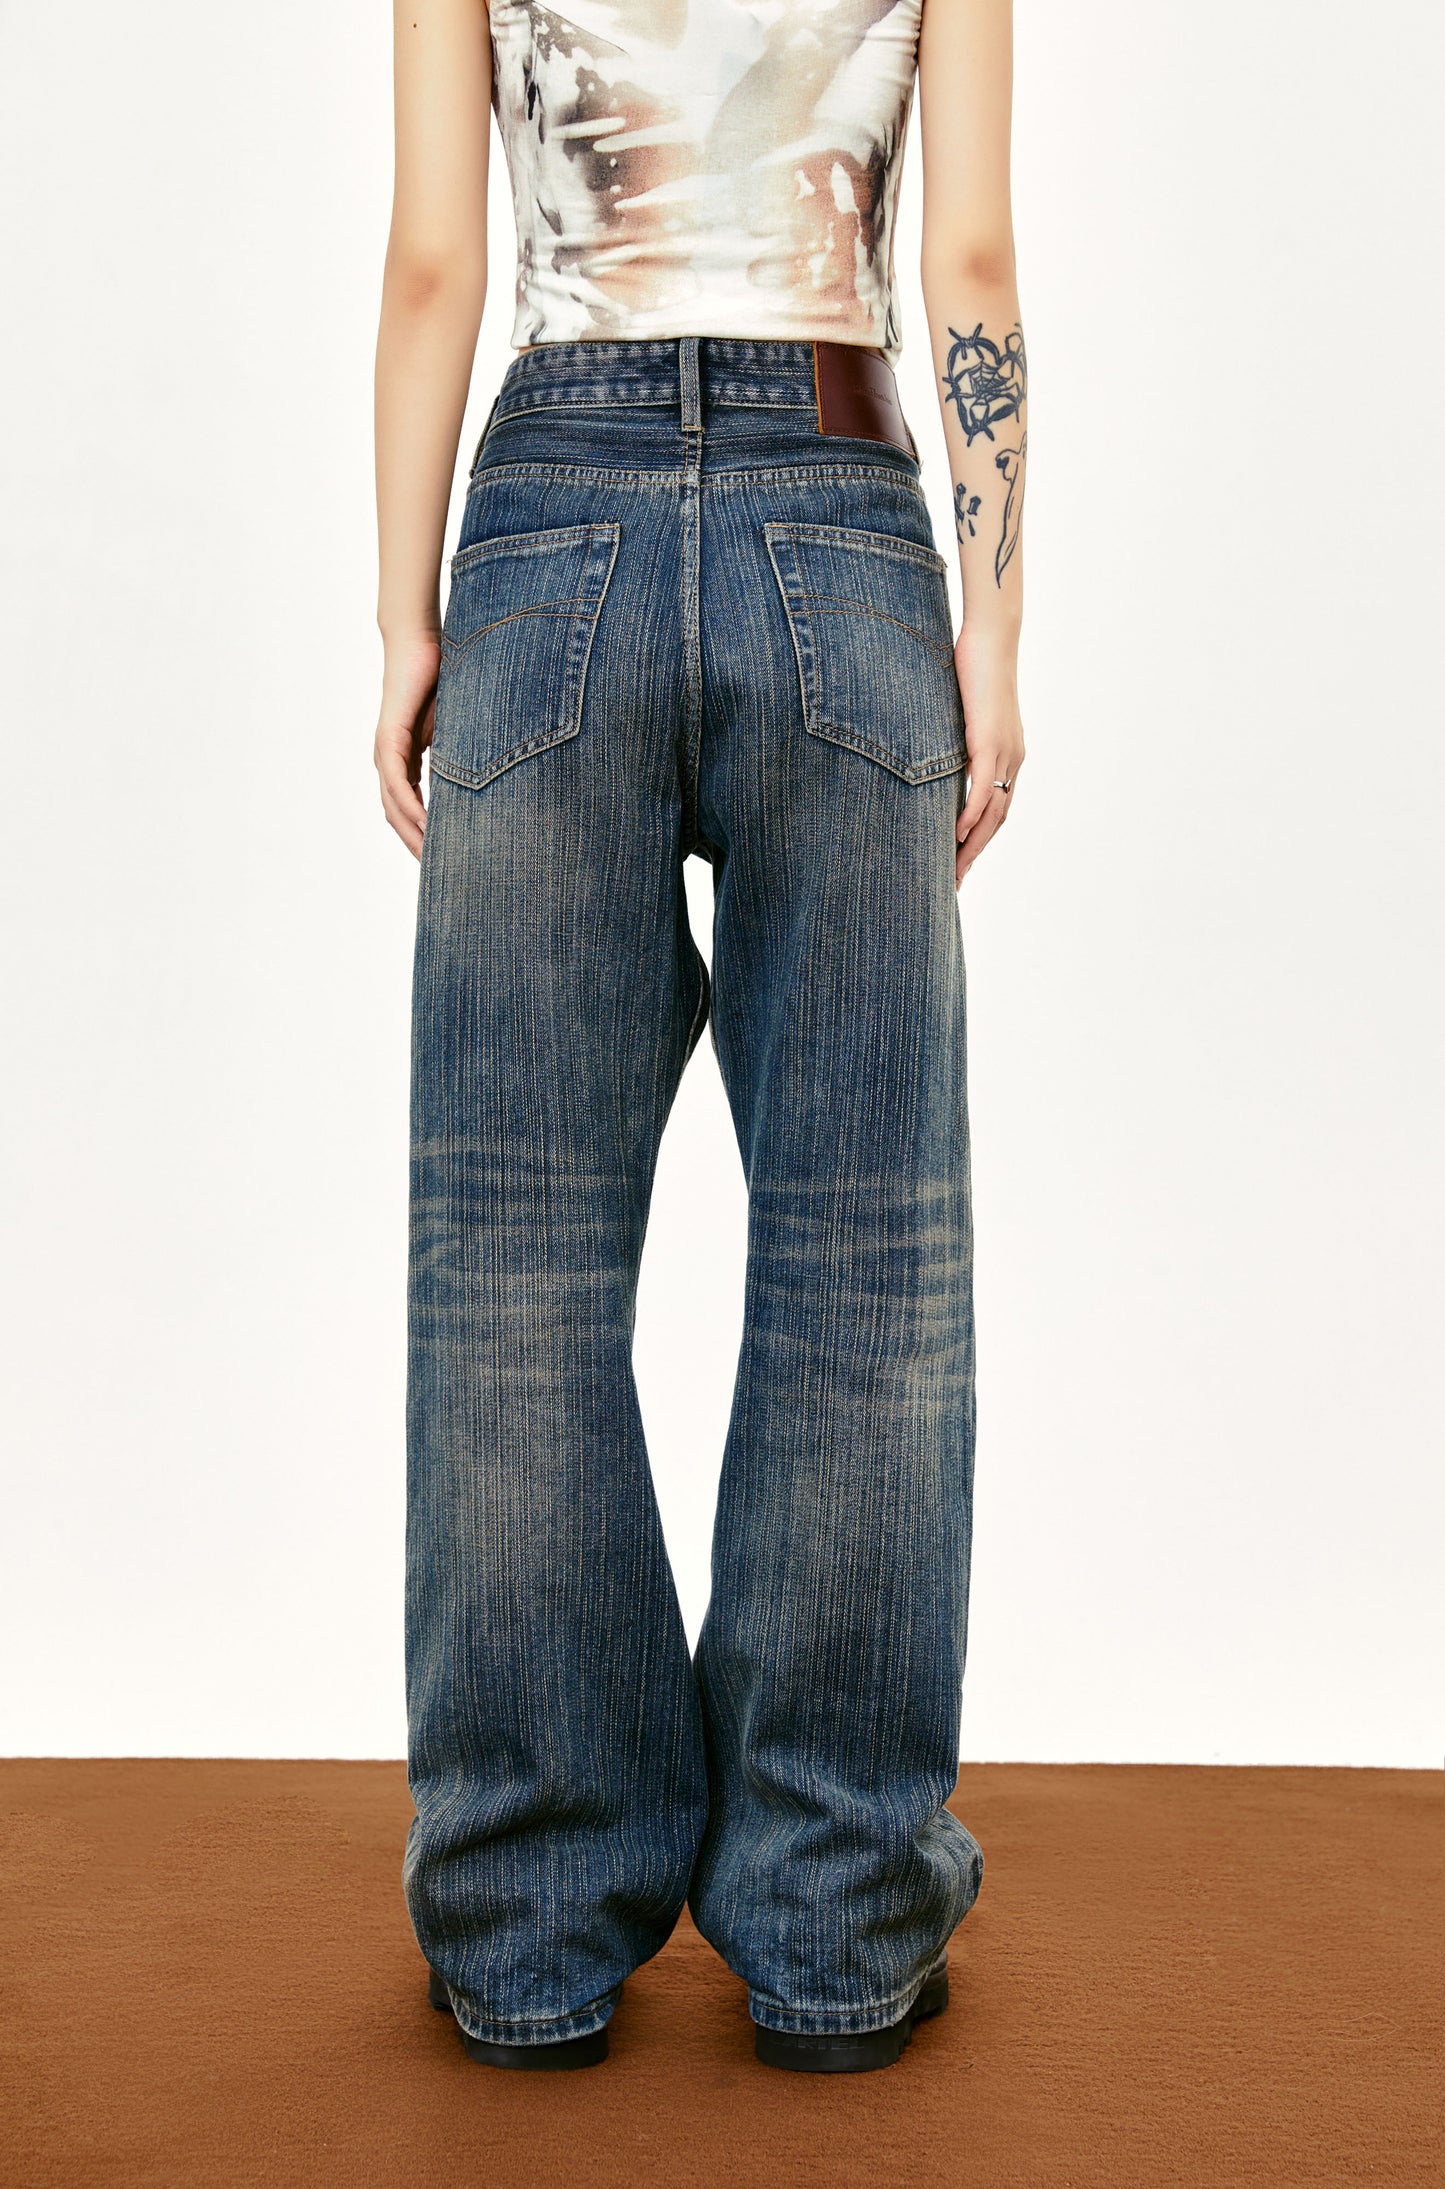 BAMBOO BLINDS JEANS PANTS